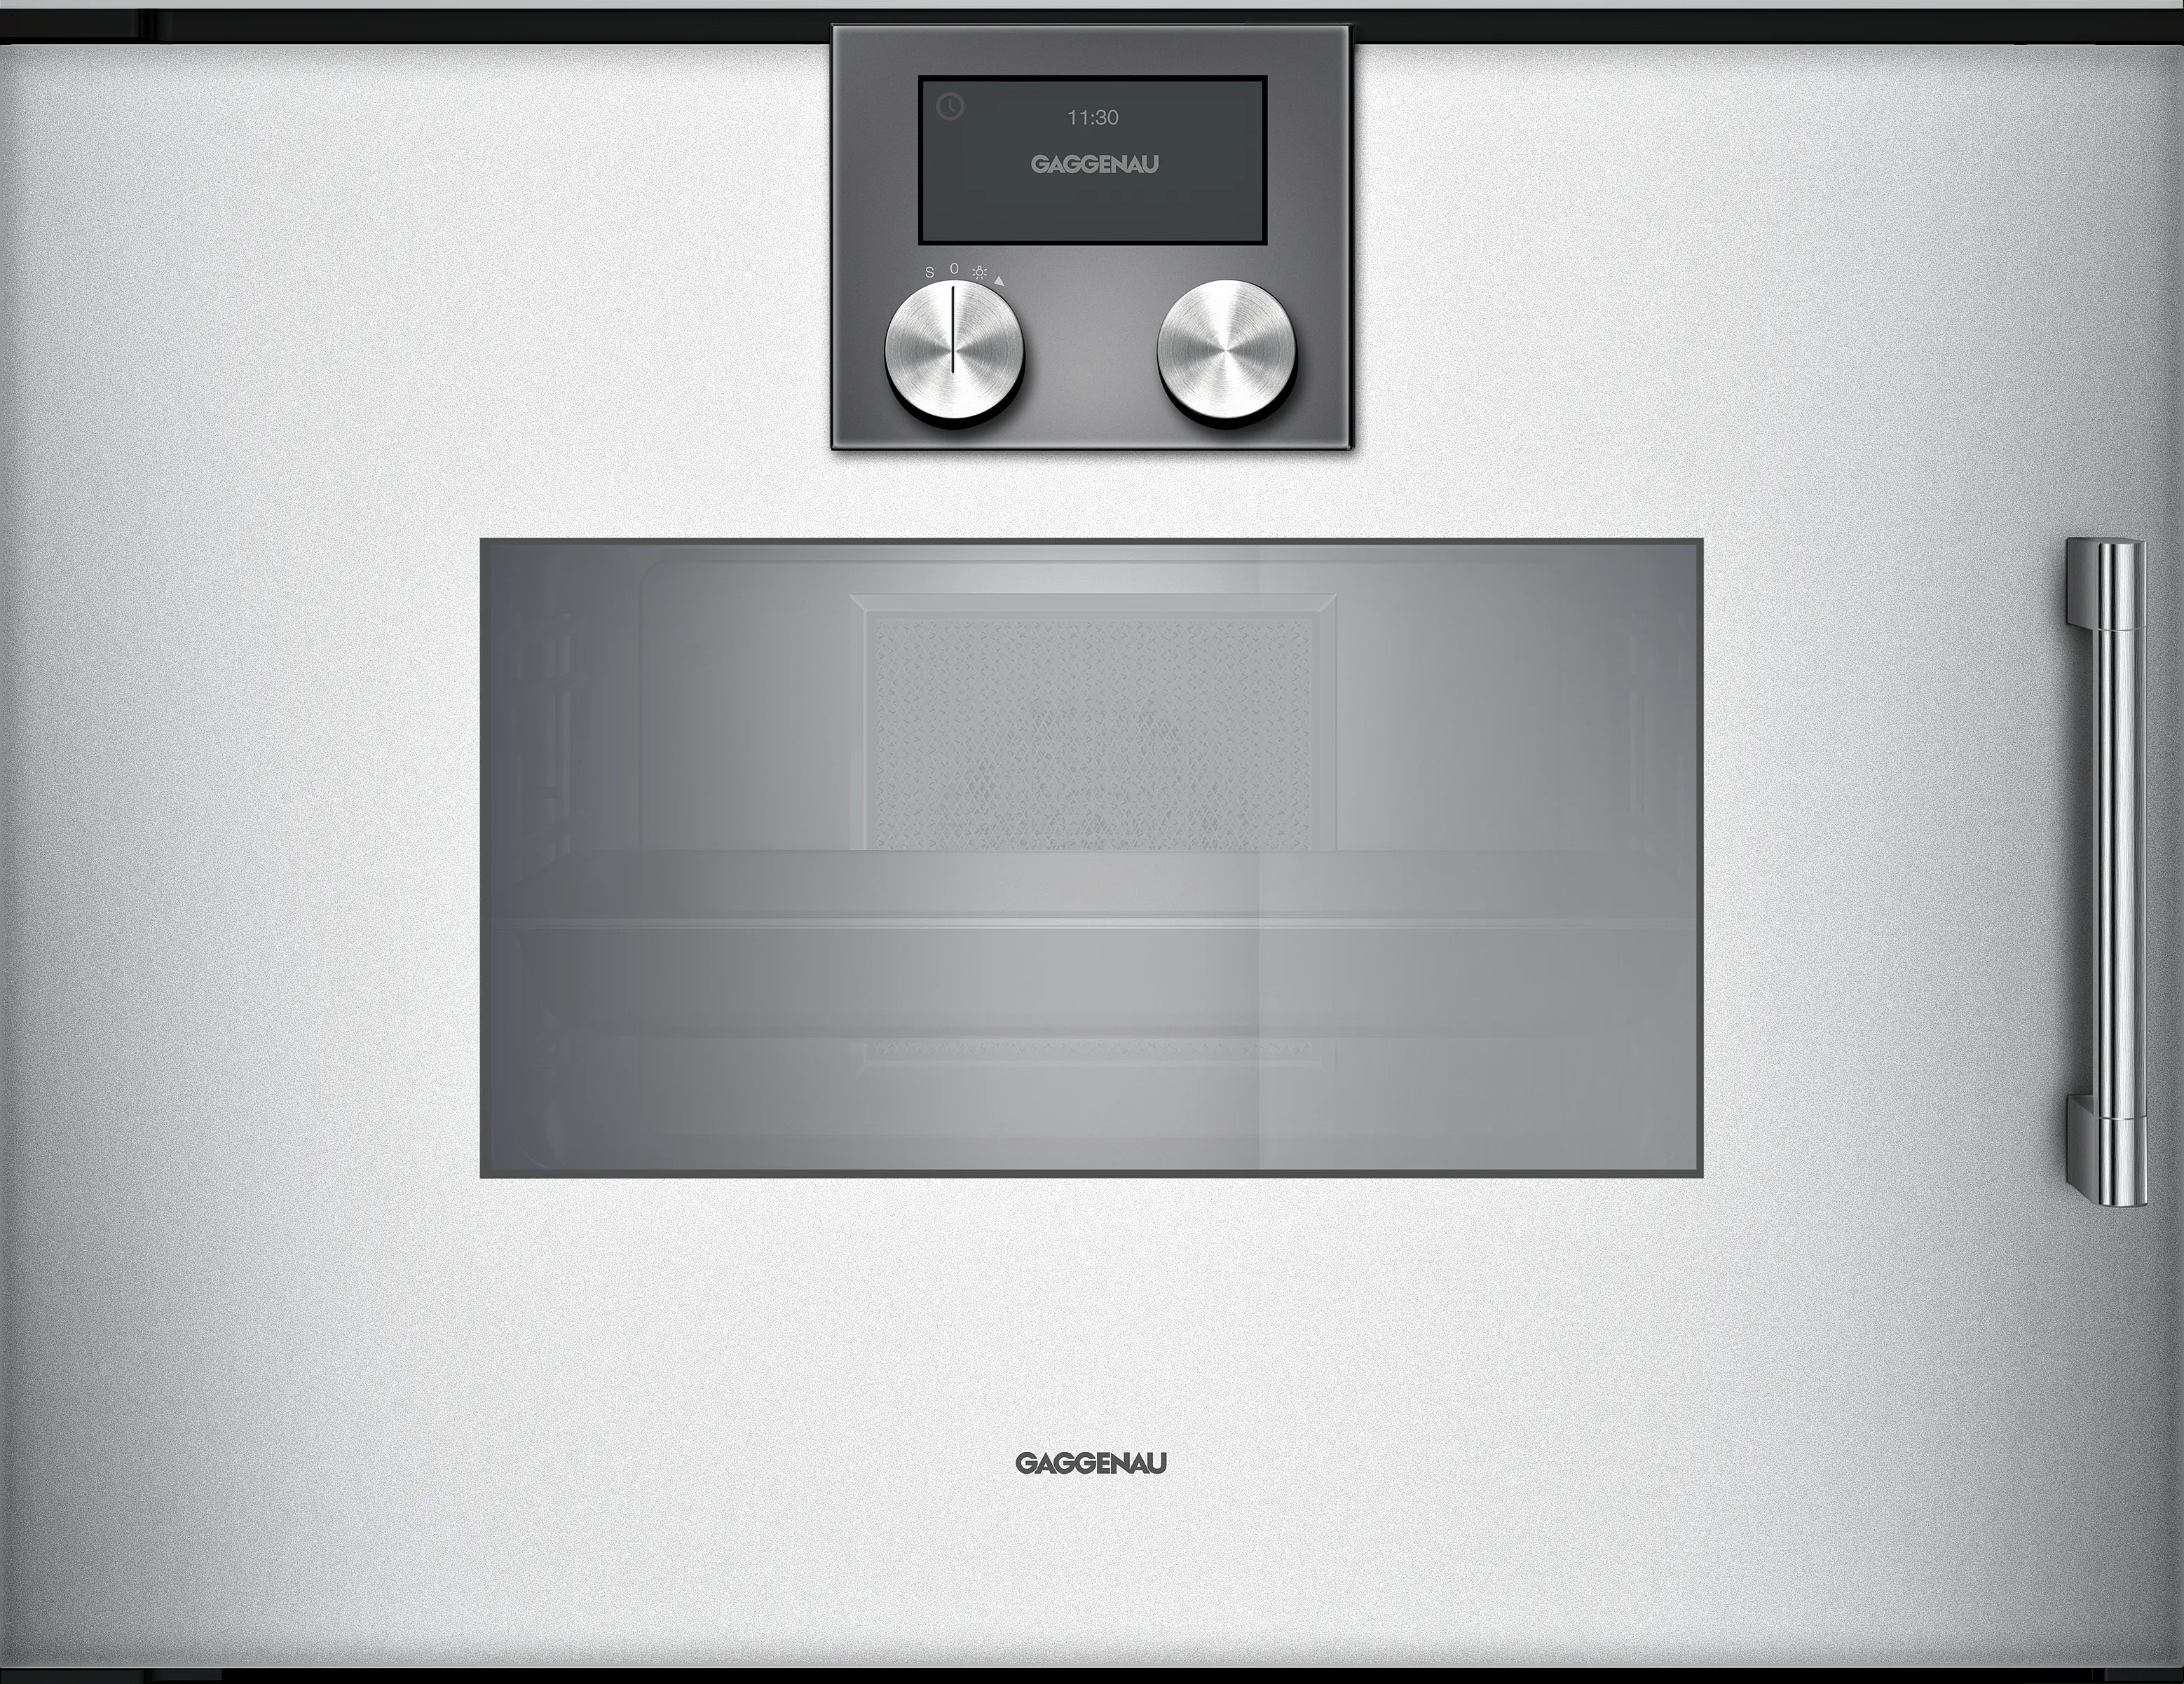 200 series Built-in compact oven with steam function 60 x 45 cm Door hinge: Left, Gaggenau Silver 